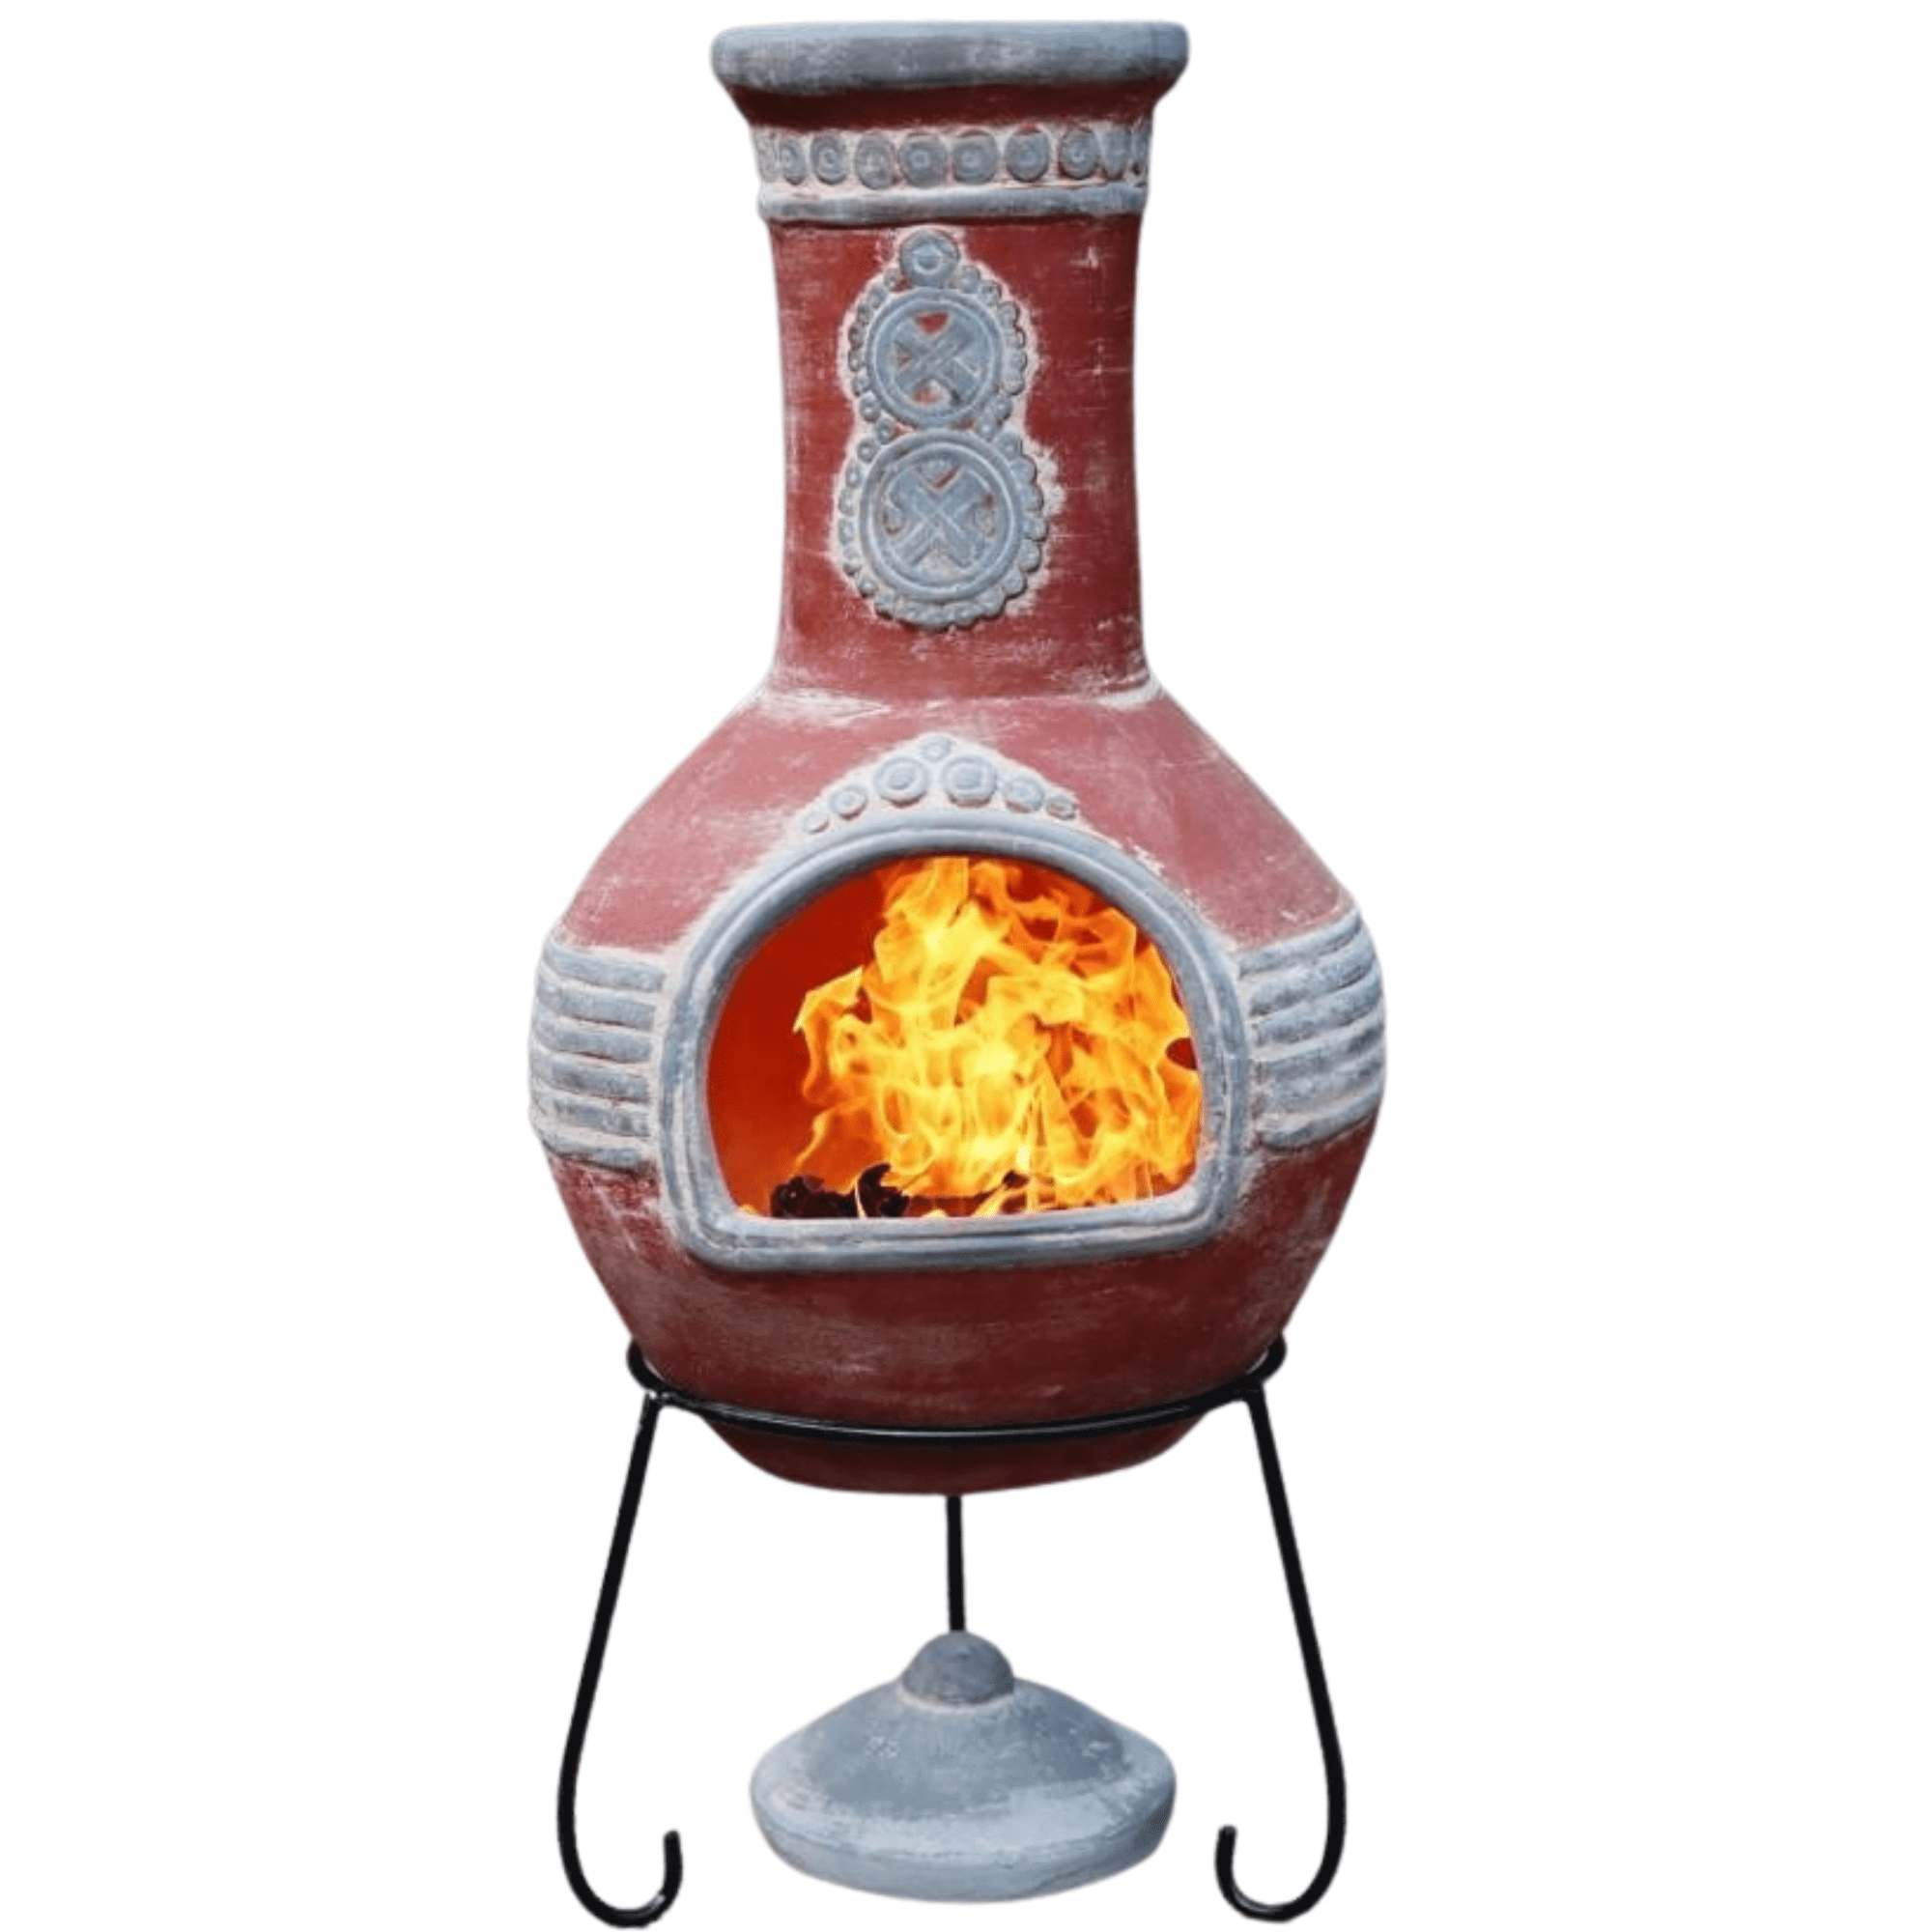 Perfect Patio UK Azteca XL Mexican Chimenea in red with grey mouth and top